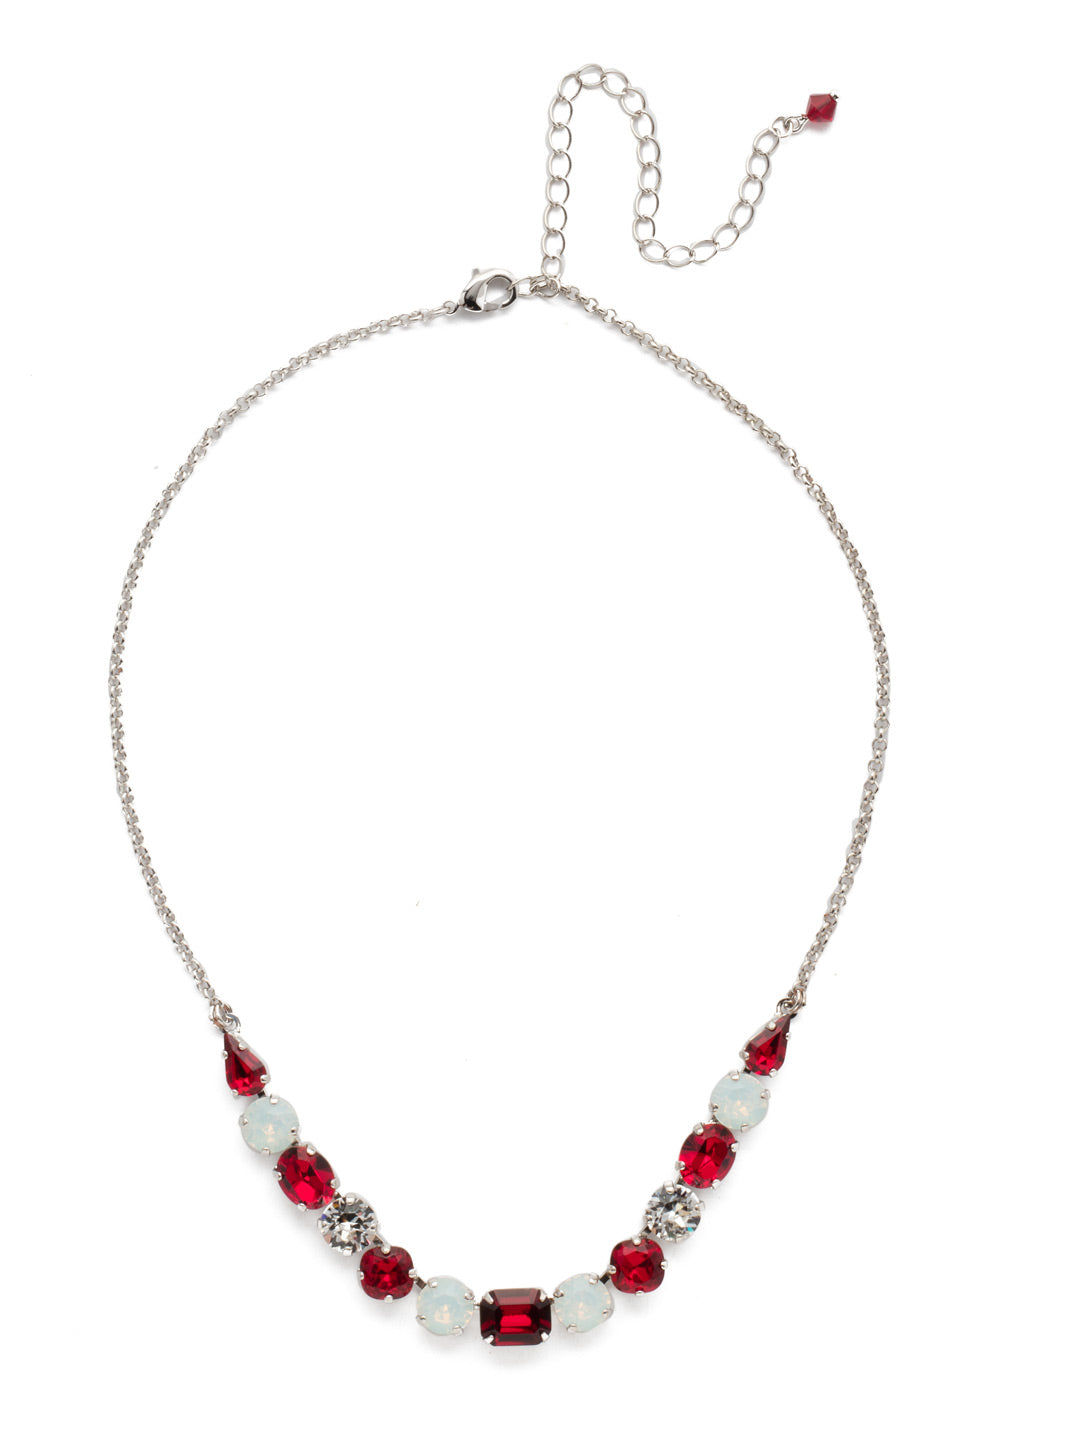 Tansy Half Line Tennis Necklace - NDQ14RHCP - Oval, round, emerald, pear and cushion cut crystals are accented by a delicate chain for subtle sparkle that looks great layered or worn solo. From Sorrelli's Crimson Pride collection in our Palladium Silver-tone finish.